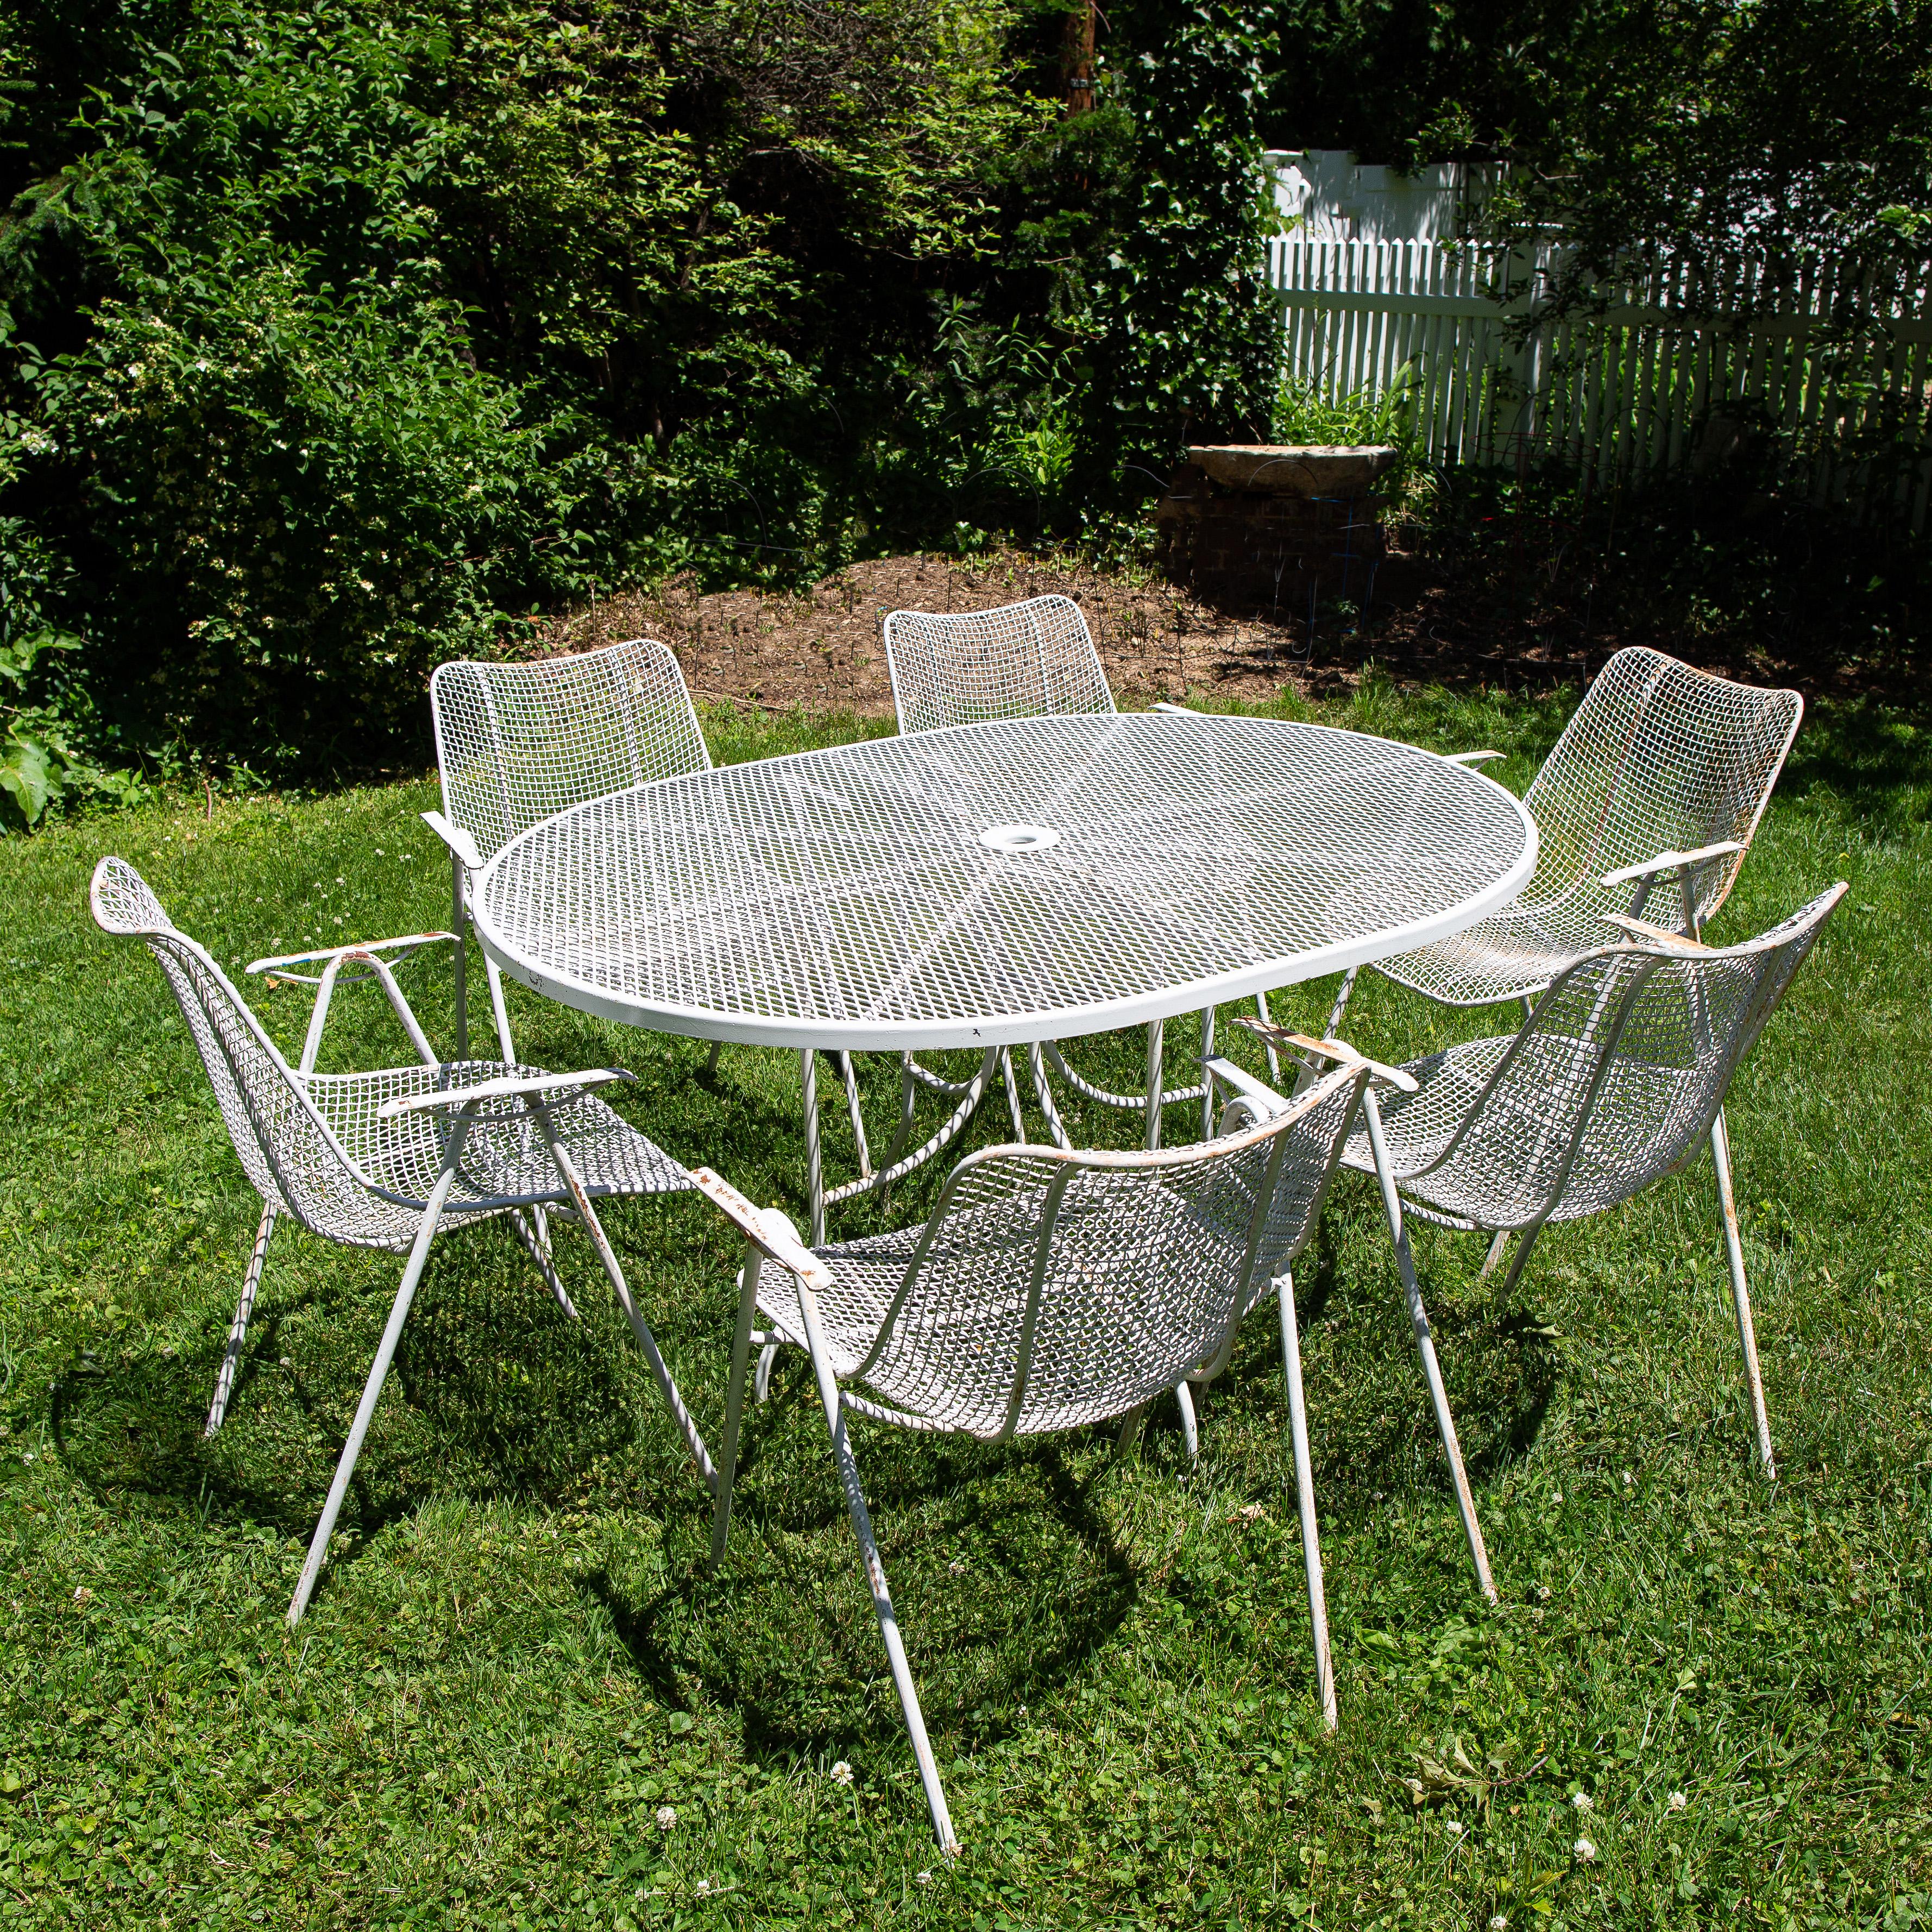 Mid-Century Modern, steel mesh and wrought iron, outdoor, patio dining set by Russell Woodard, Sculptura features 6 armchairs with an oval dining table. The chairs measure: 24 width x 24 depth x 32 height, seat height 17. The table measures: 54 x 42